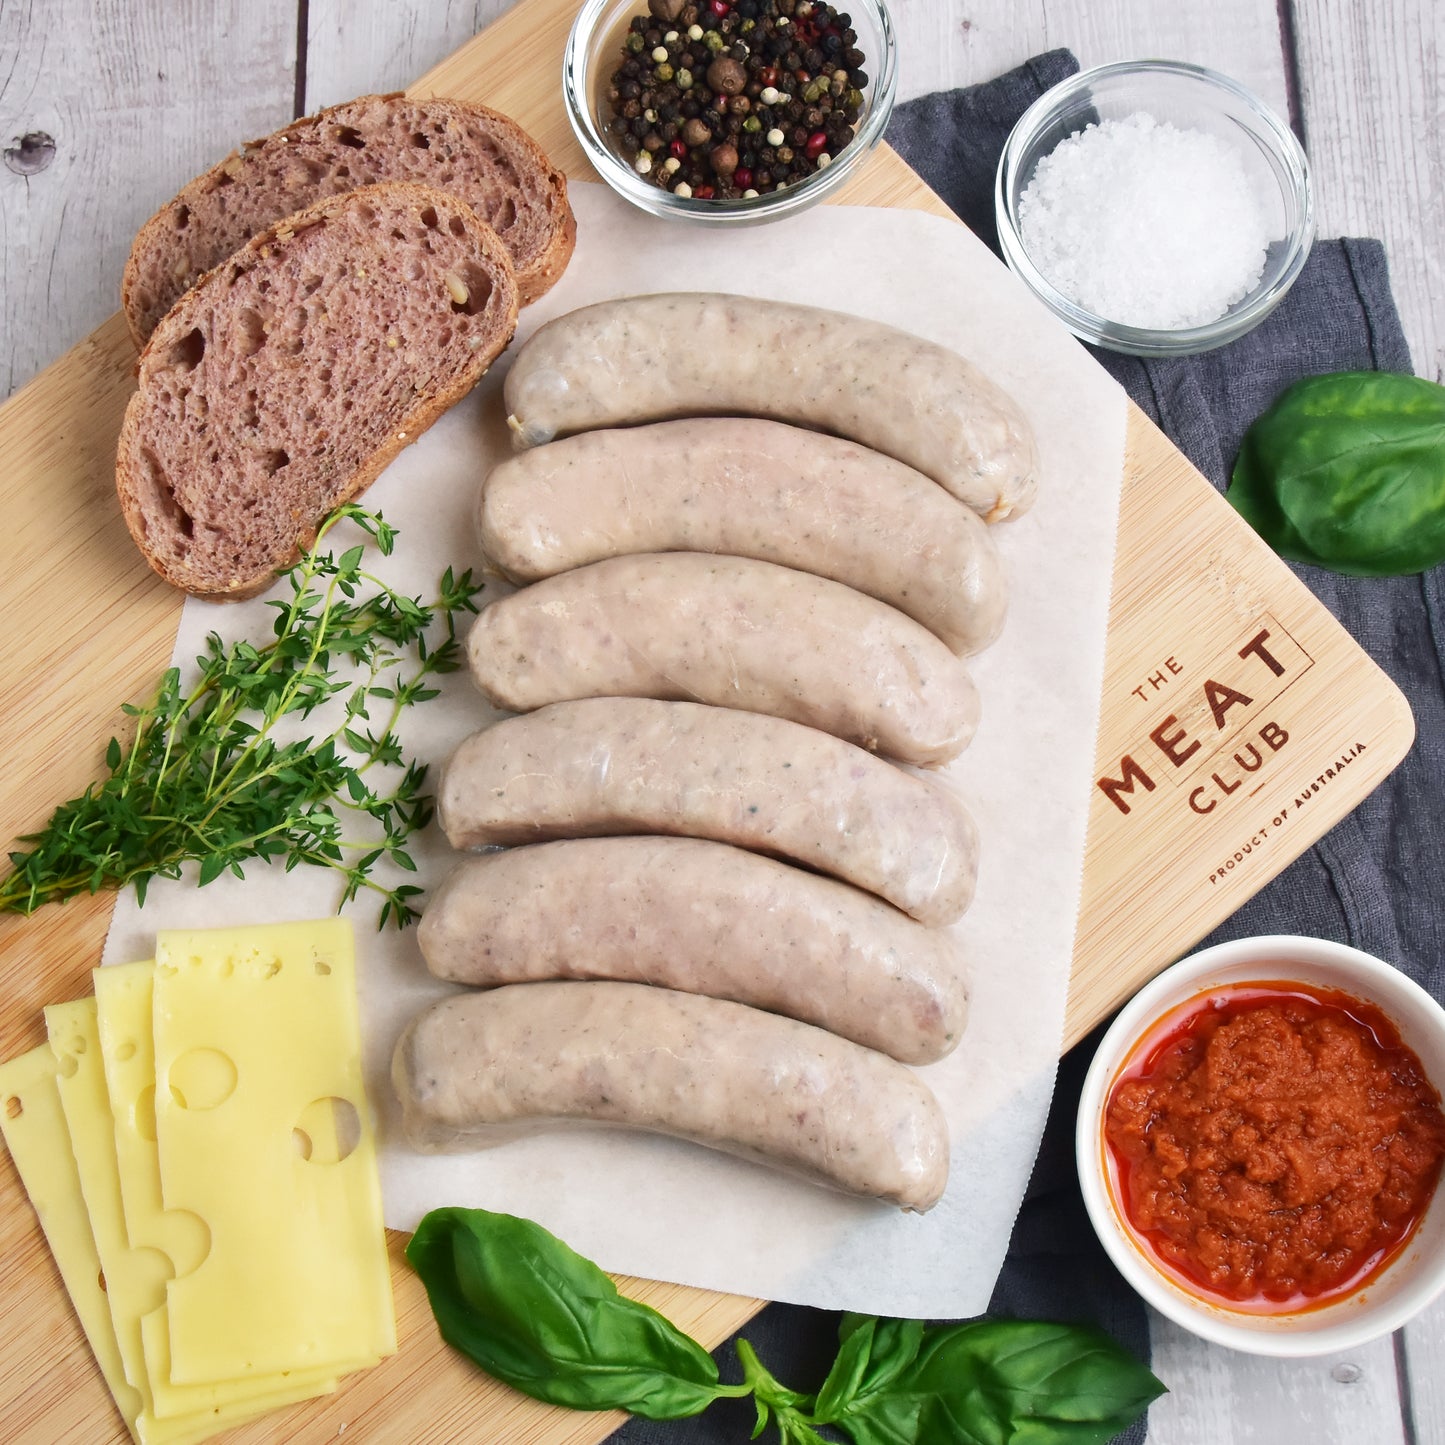 Free Range Australian Kid Friendly Italian Sausages from The Meat Club